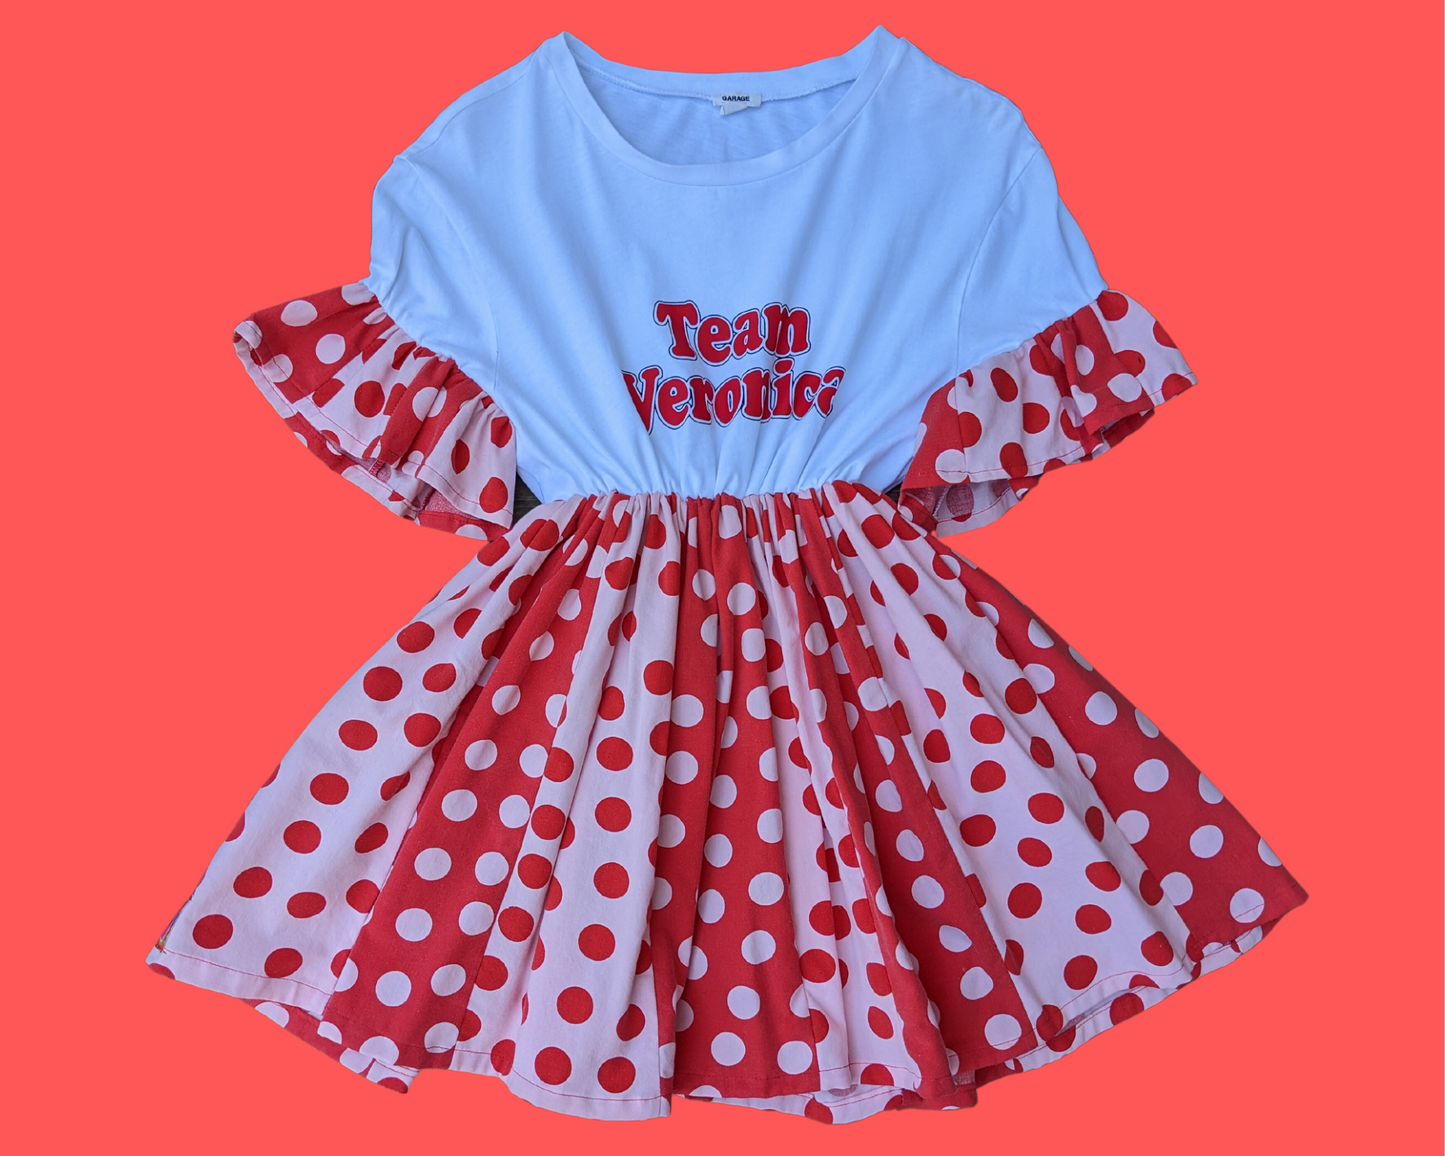 Handmade, Upcycled Archie's Team Veronica T-Shirt Dress with Red and White Polka Dot Fabric Size S